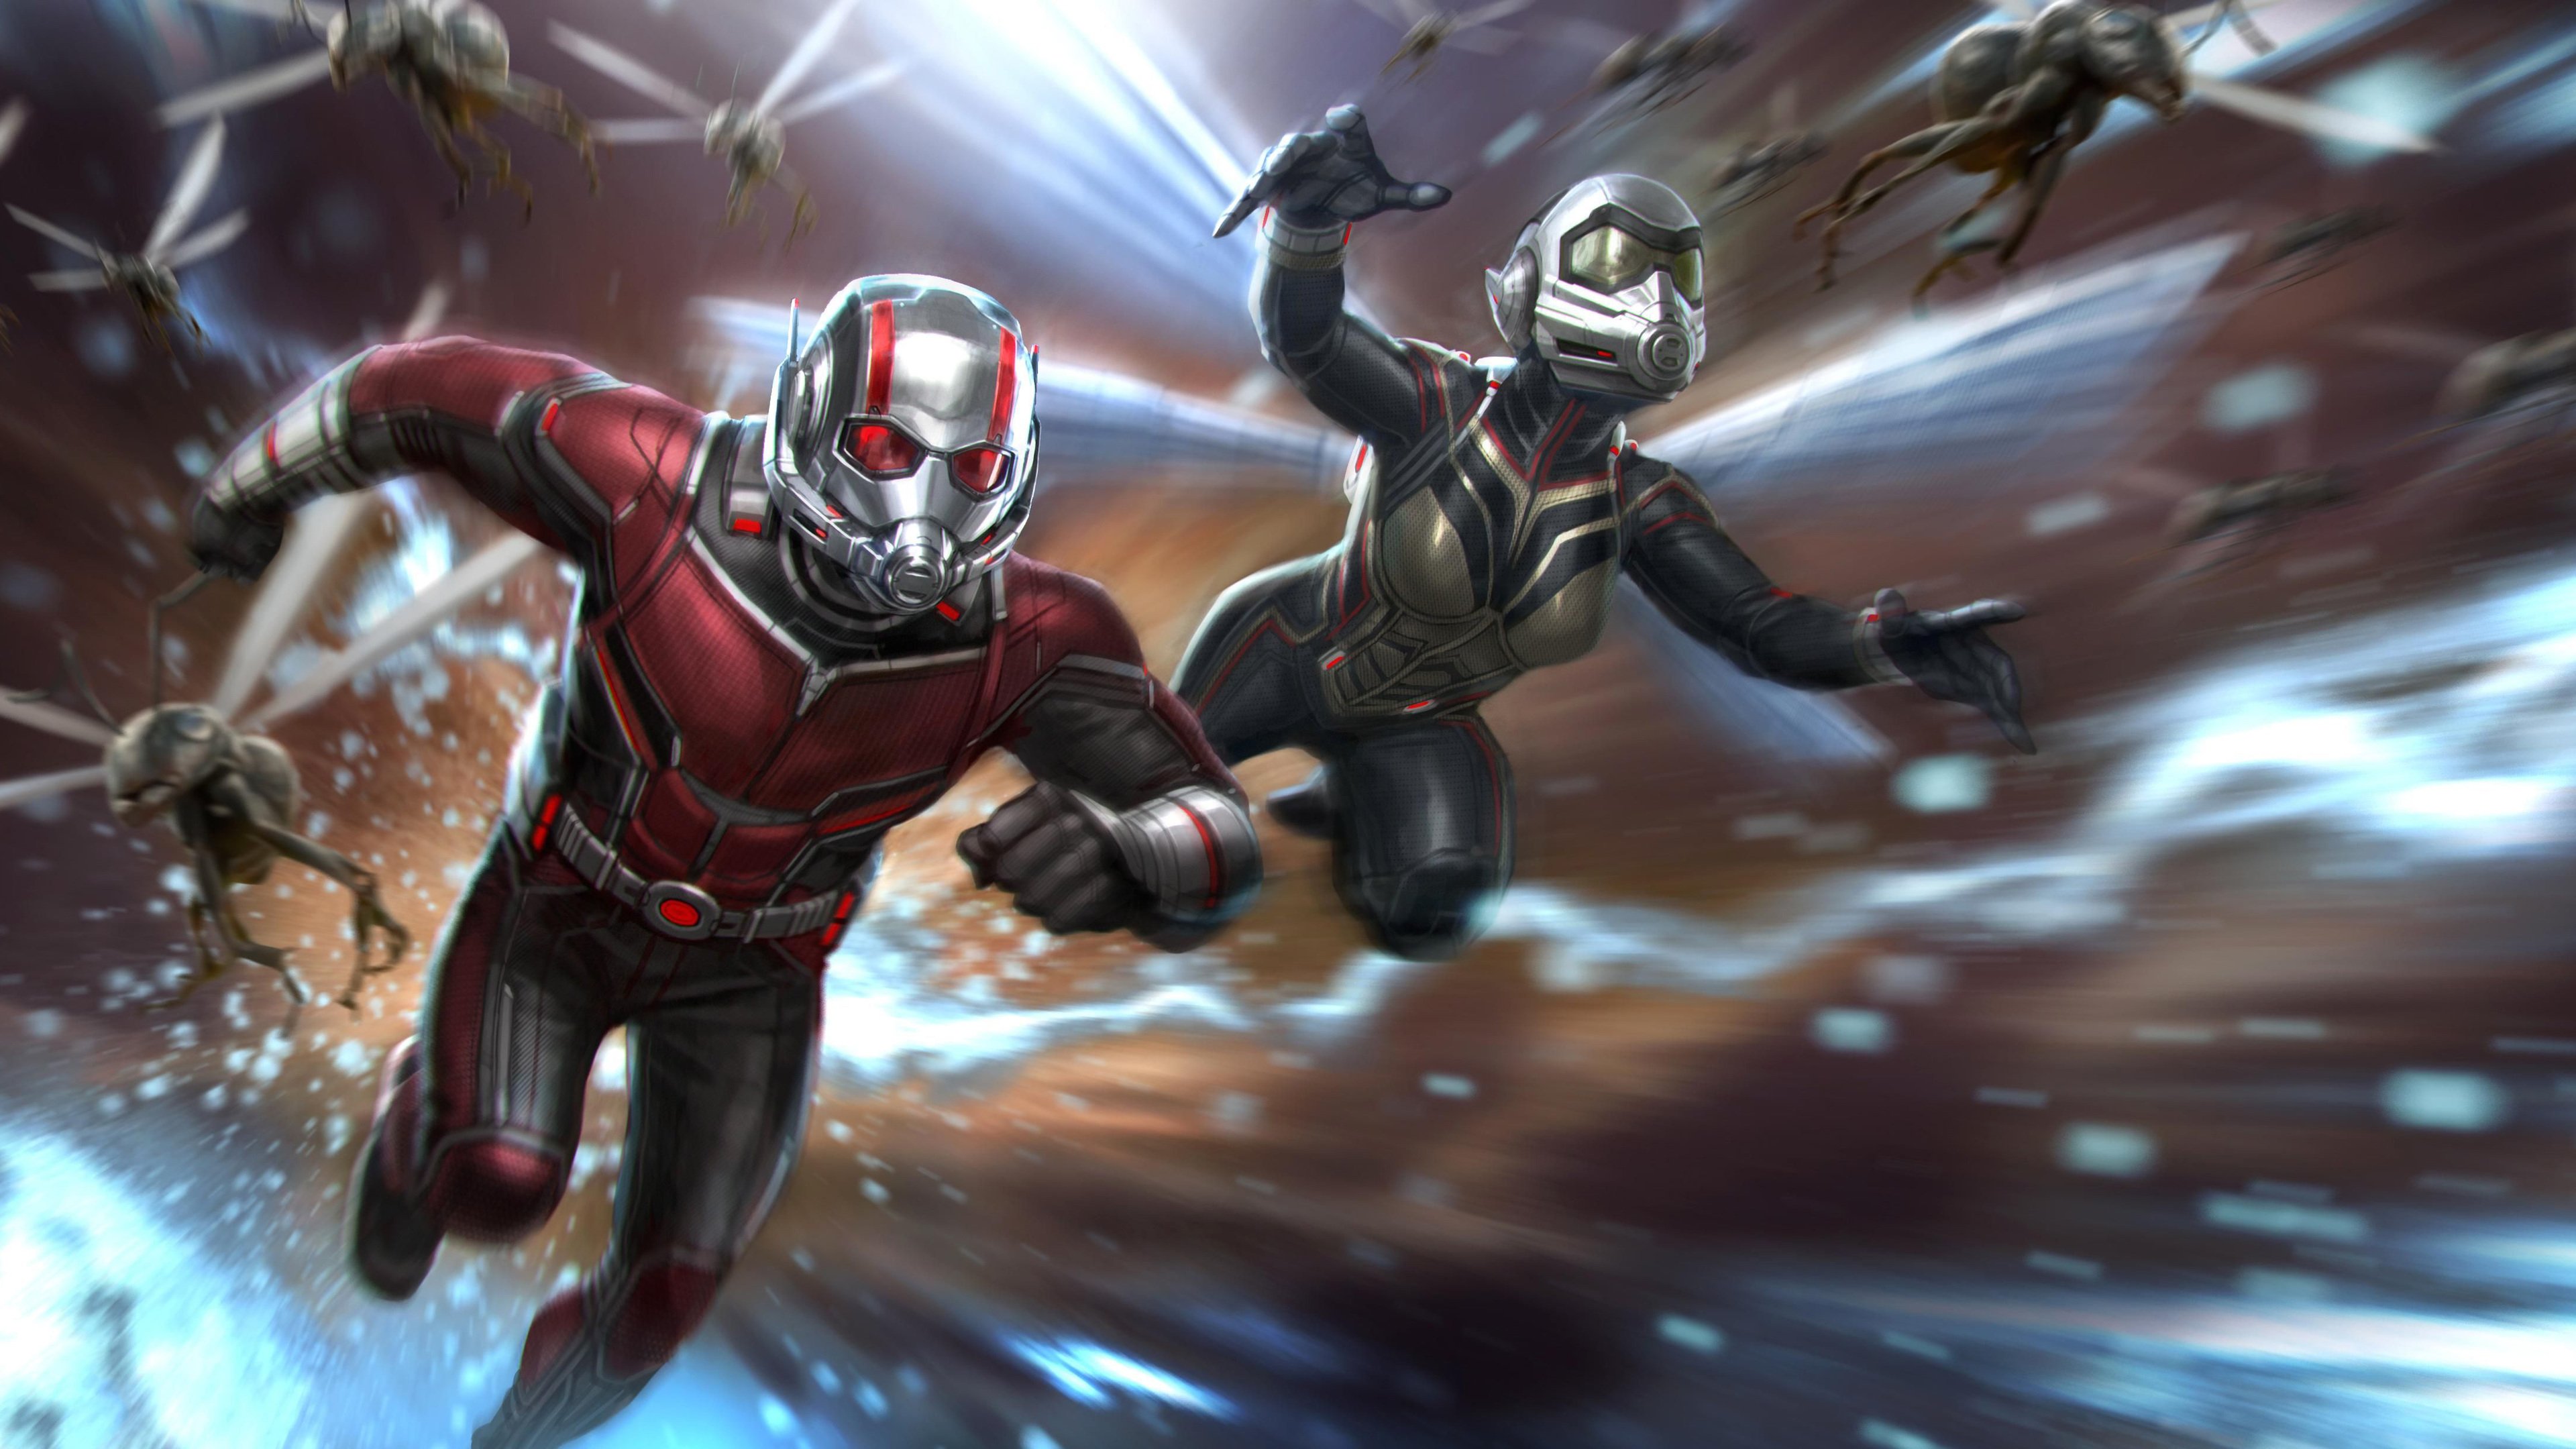 Wallpaper 4k Ant Man And The Wasp Movie Concept Art Wallpaper